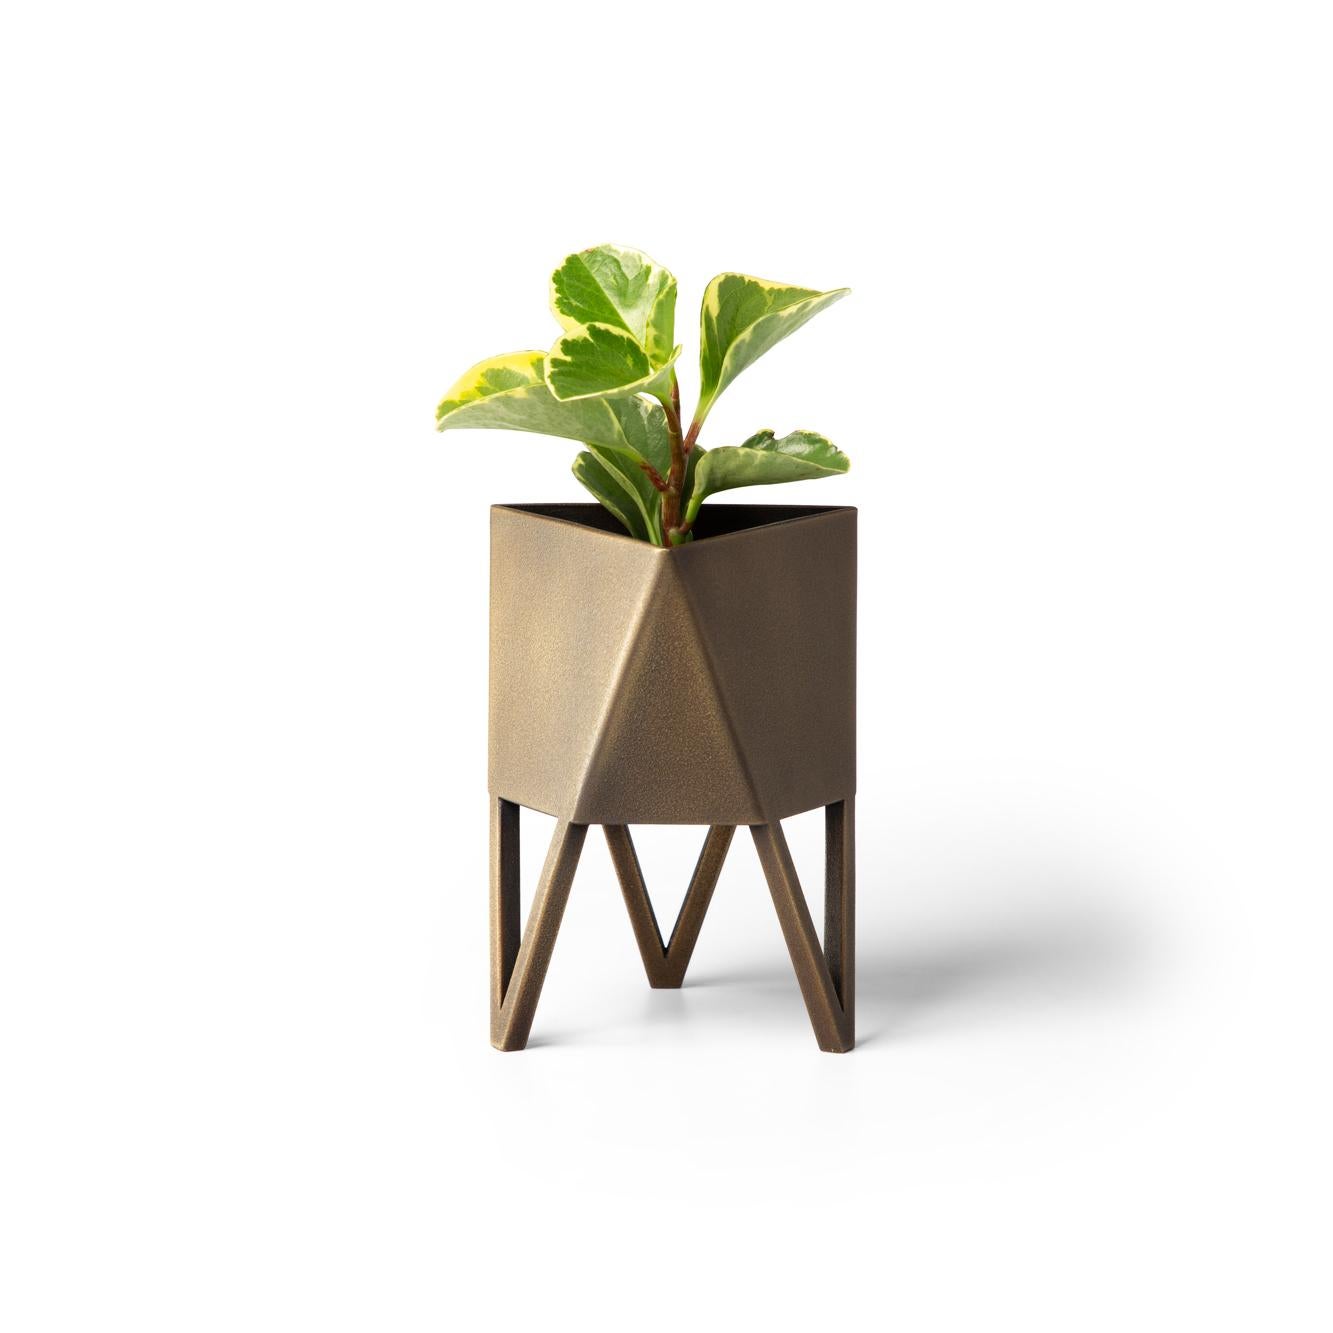 Deca Planter in Mineral By Force/Collide, Size Mini, 2023 For Sale 9